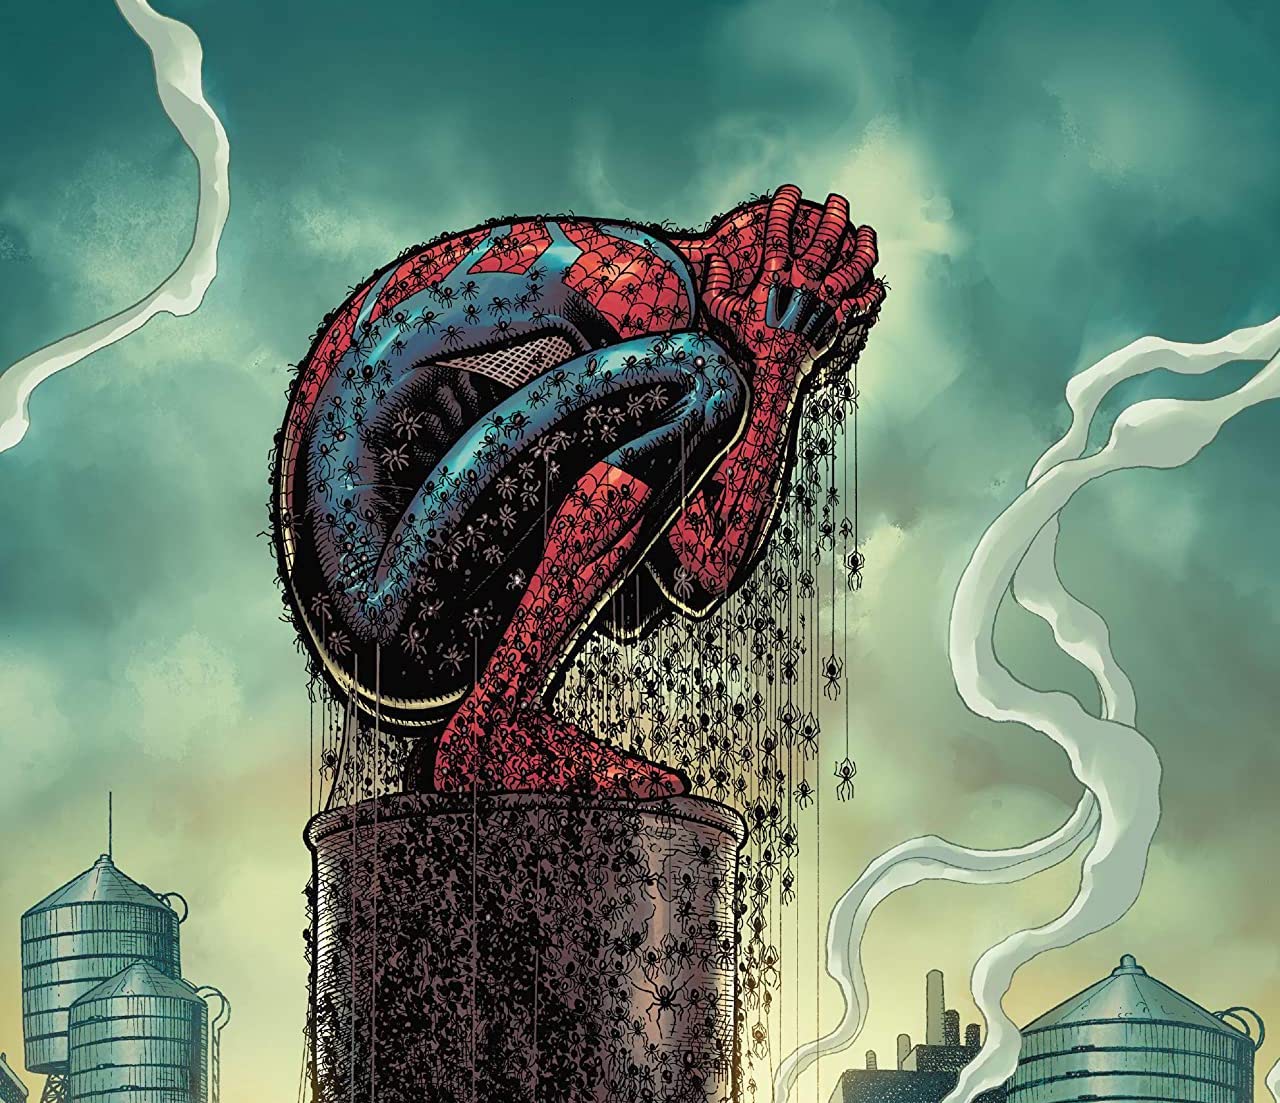 'The Amazing Spider-Man' #86 unveils new truths about being a clone